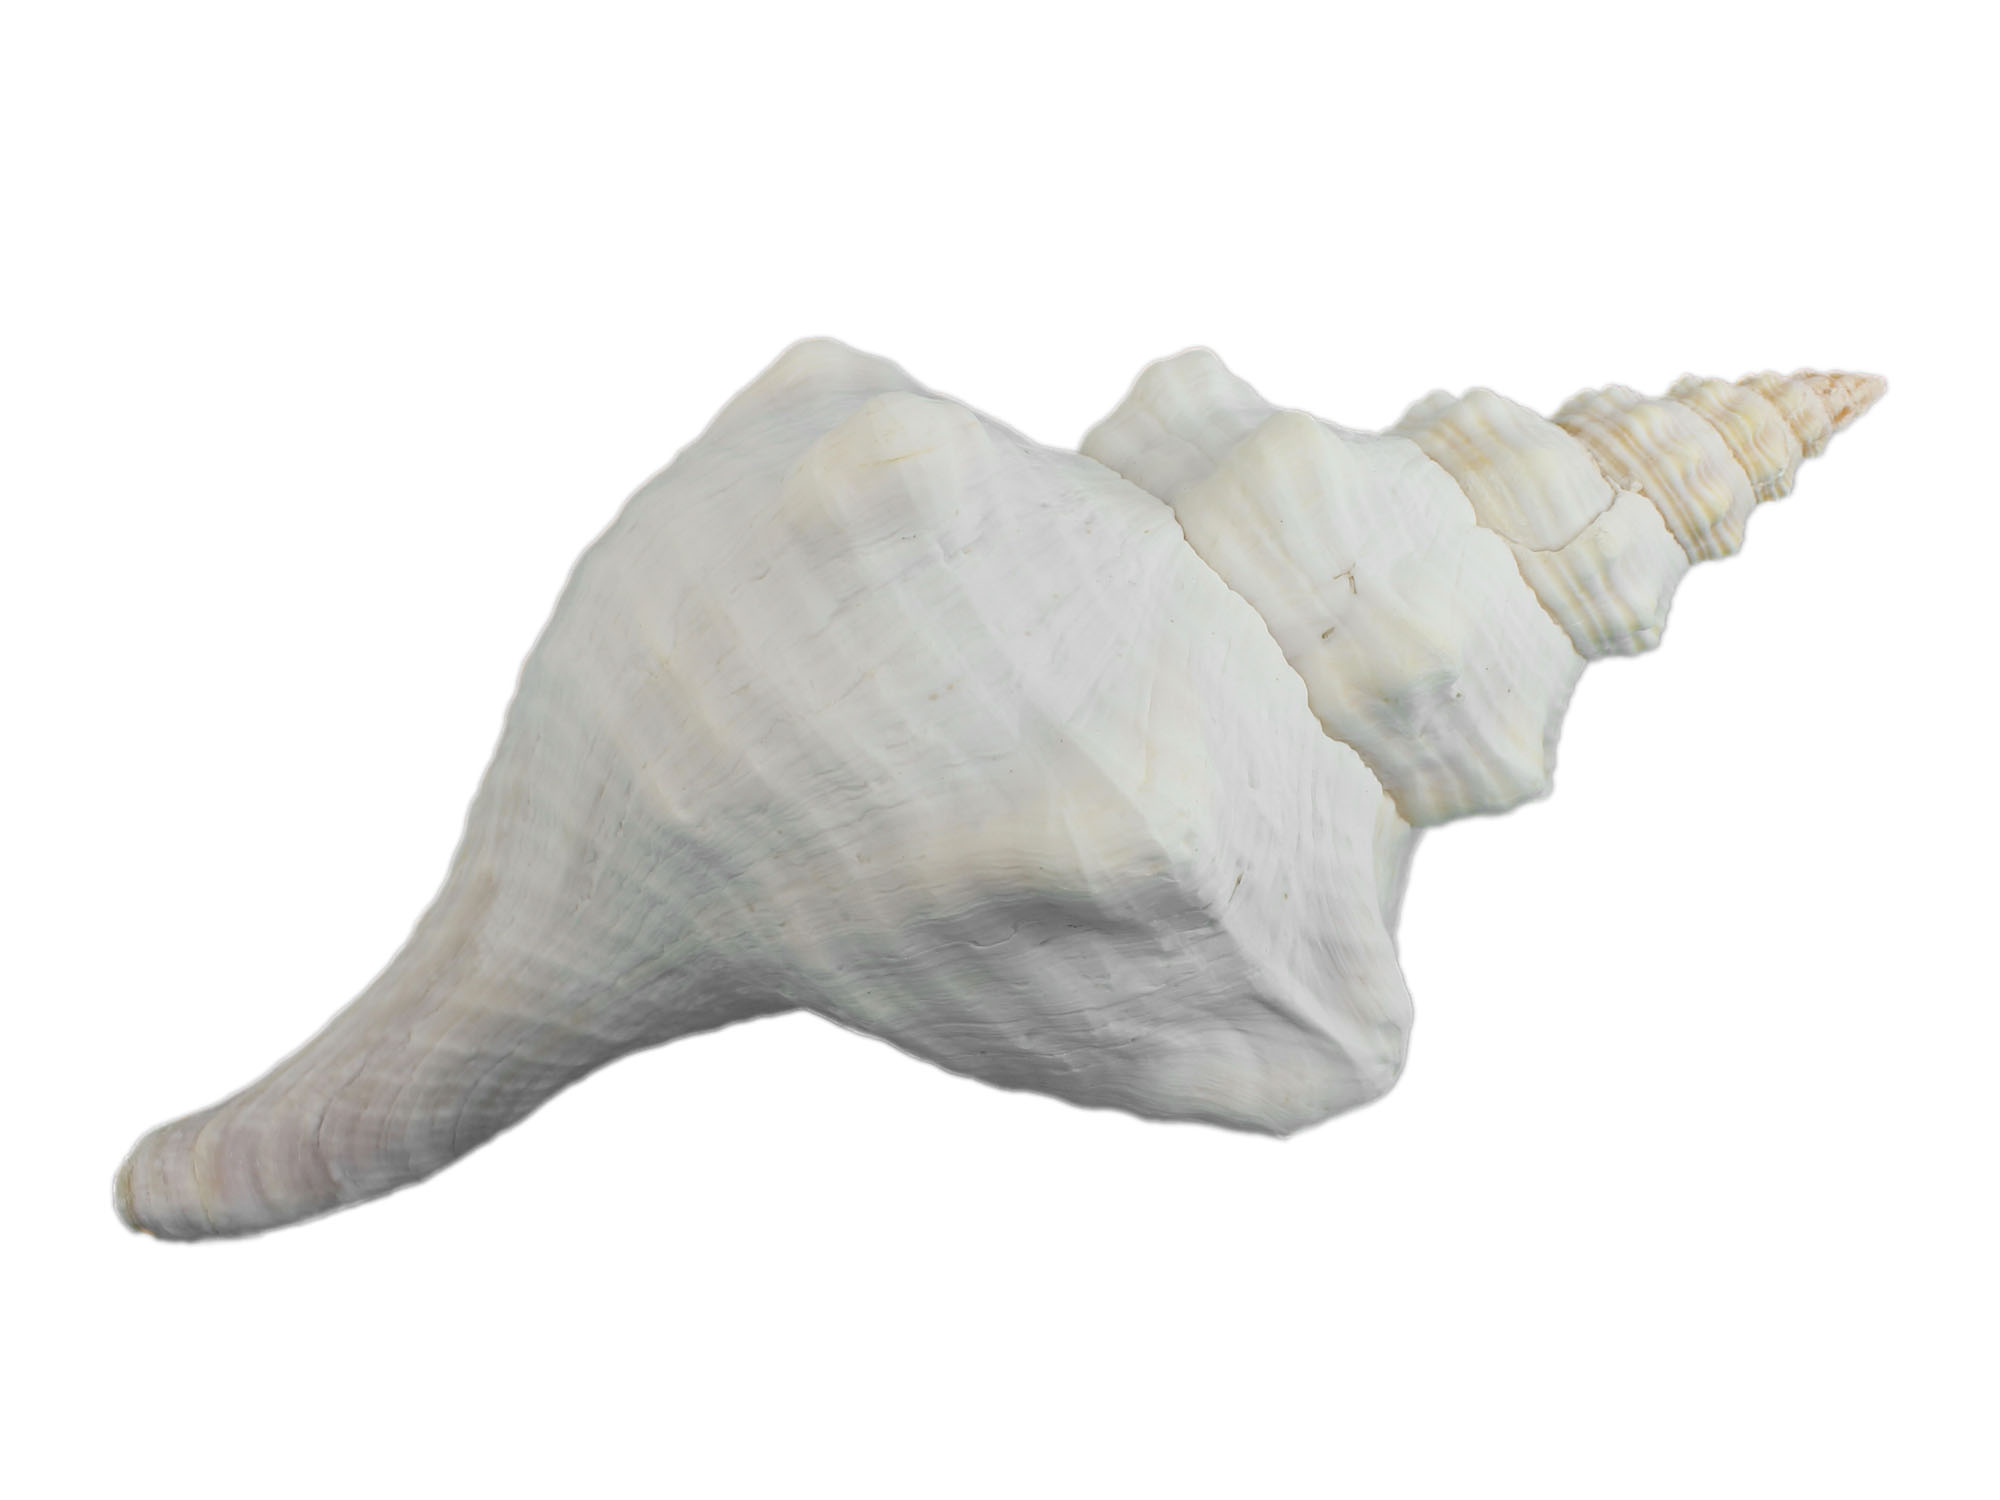 Mexican Horse Conch Shell: 12" to 13" Florida horse conch, sea snail shell